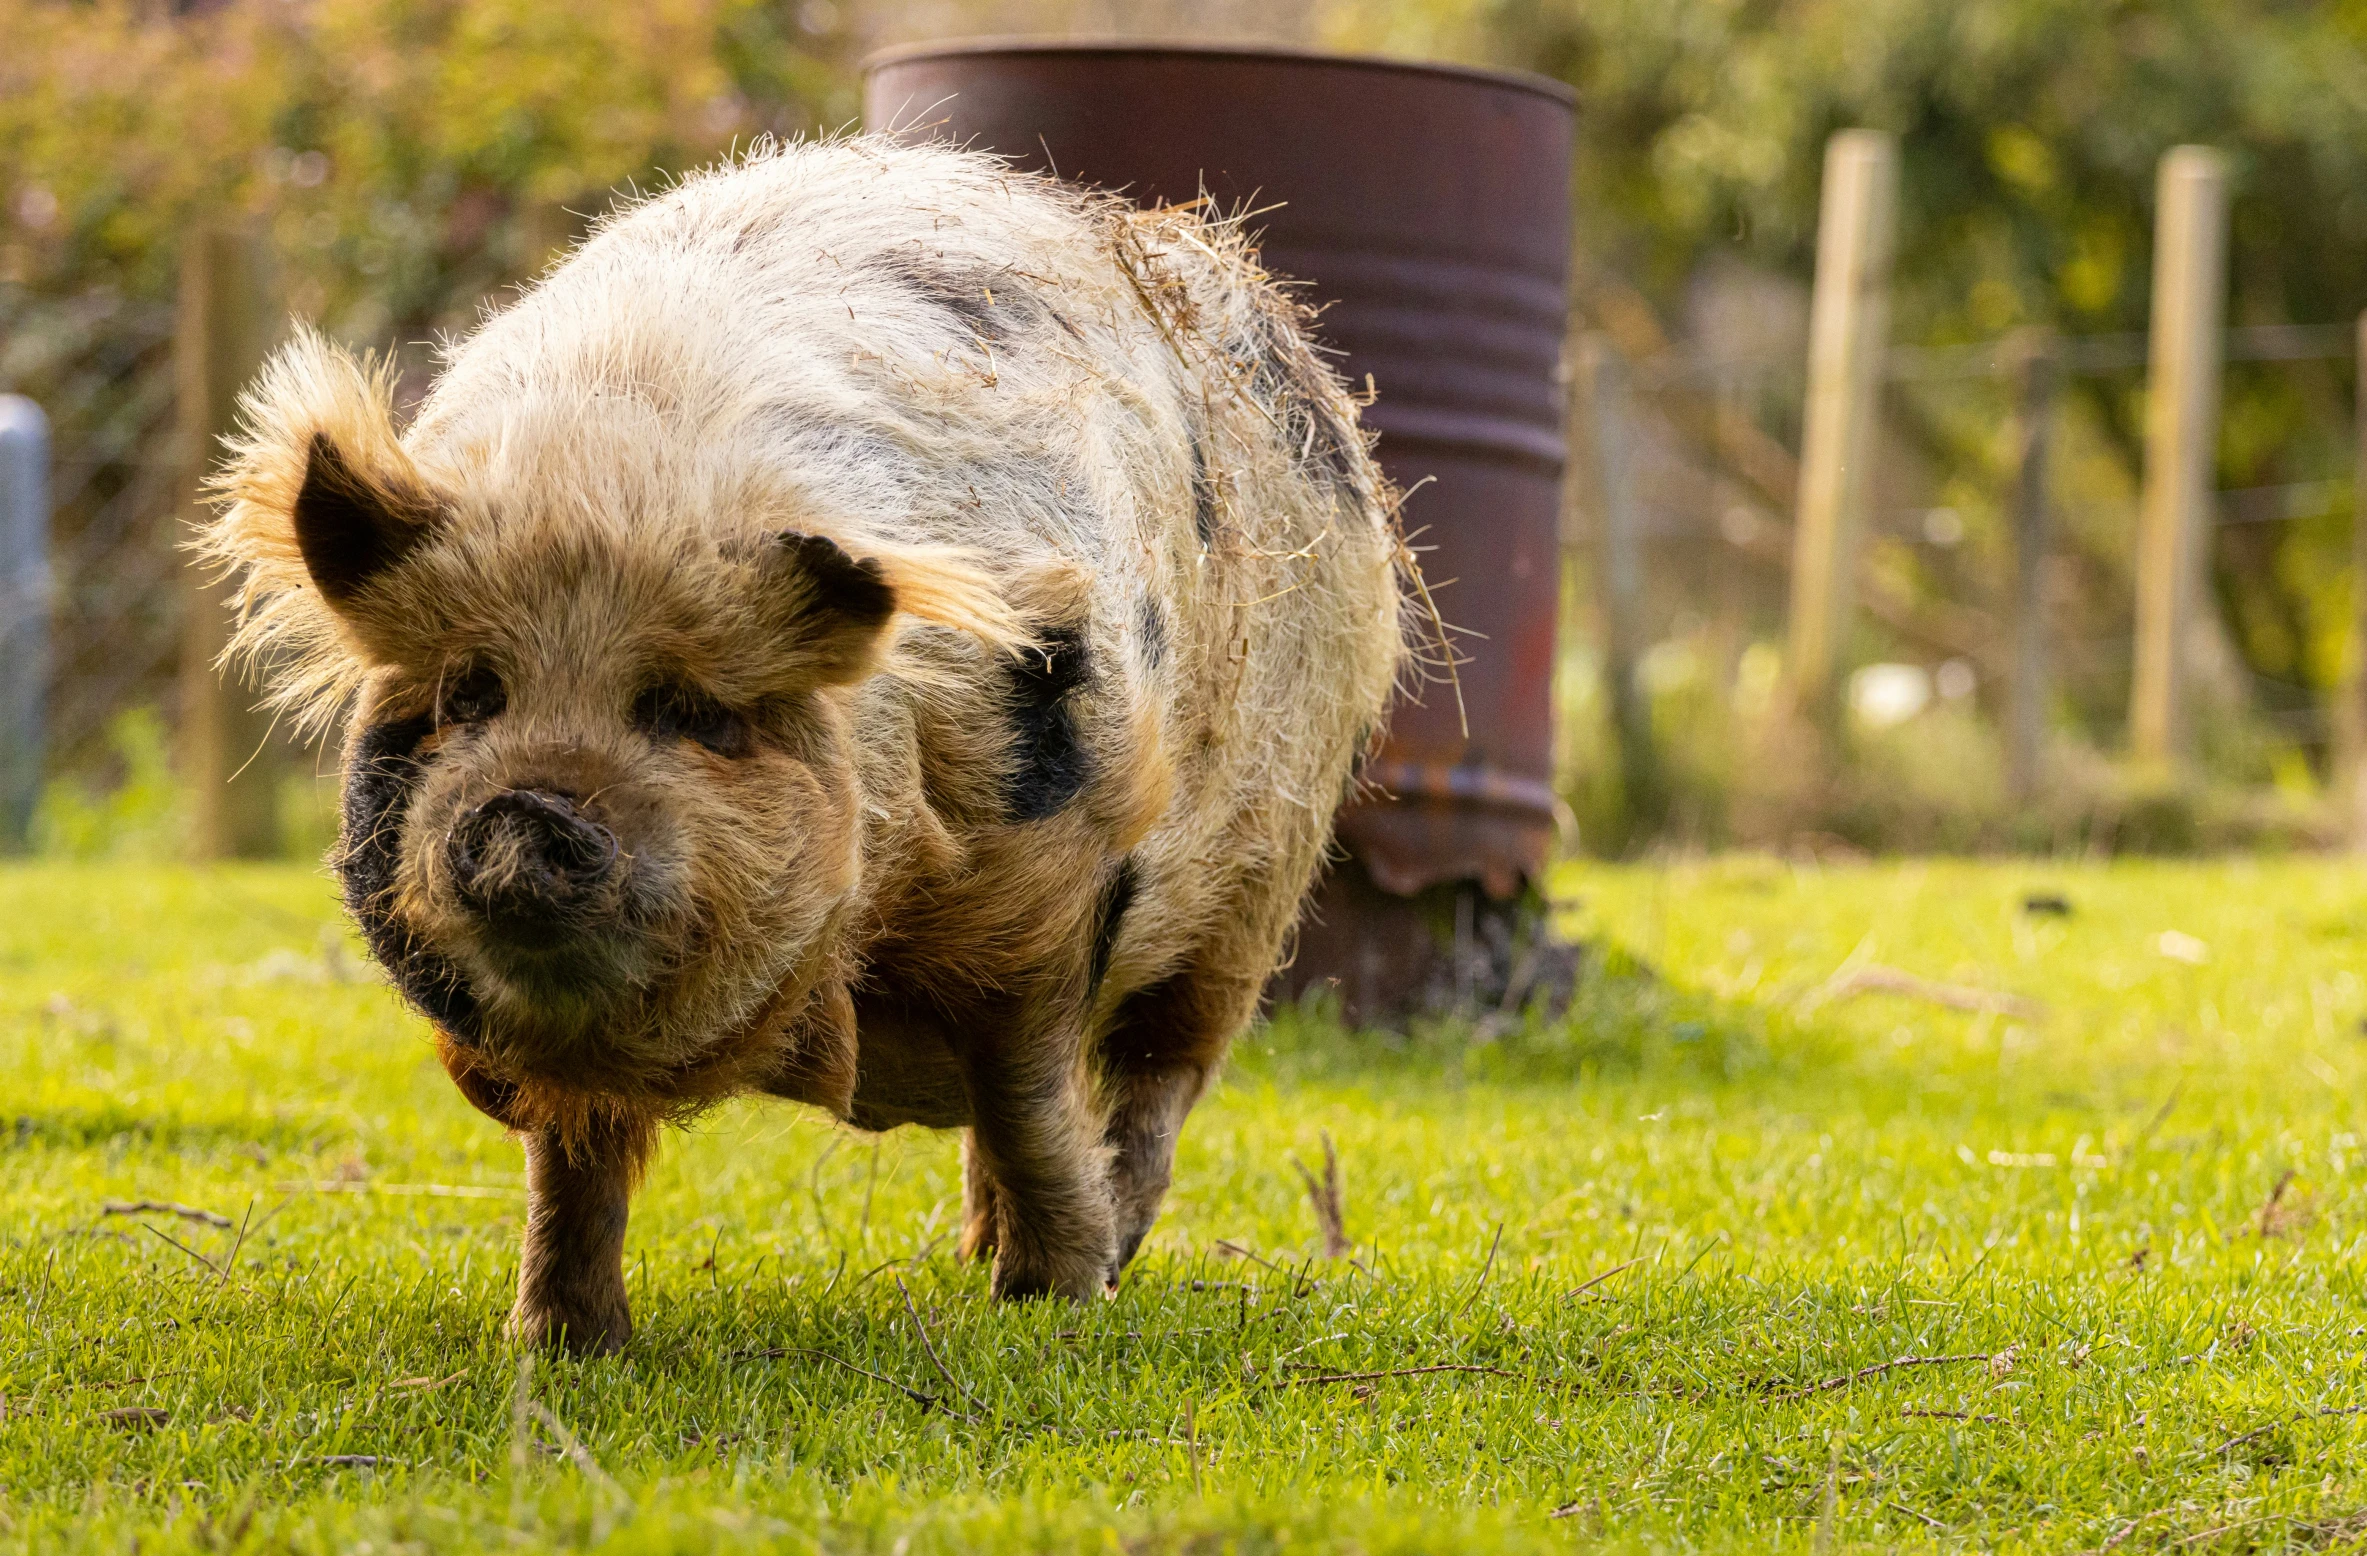 a pig that is walking in the grass